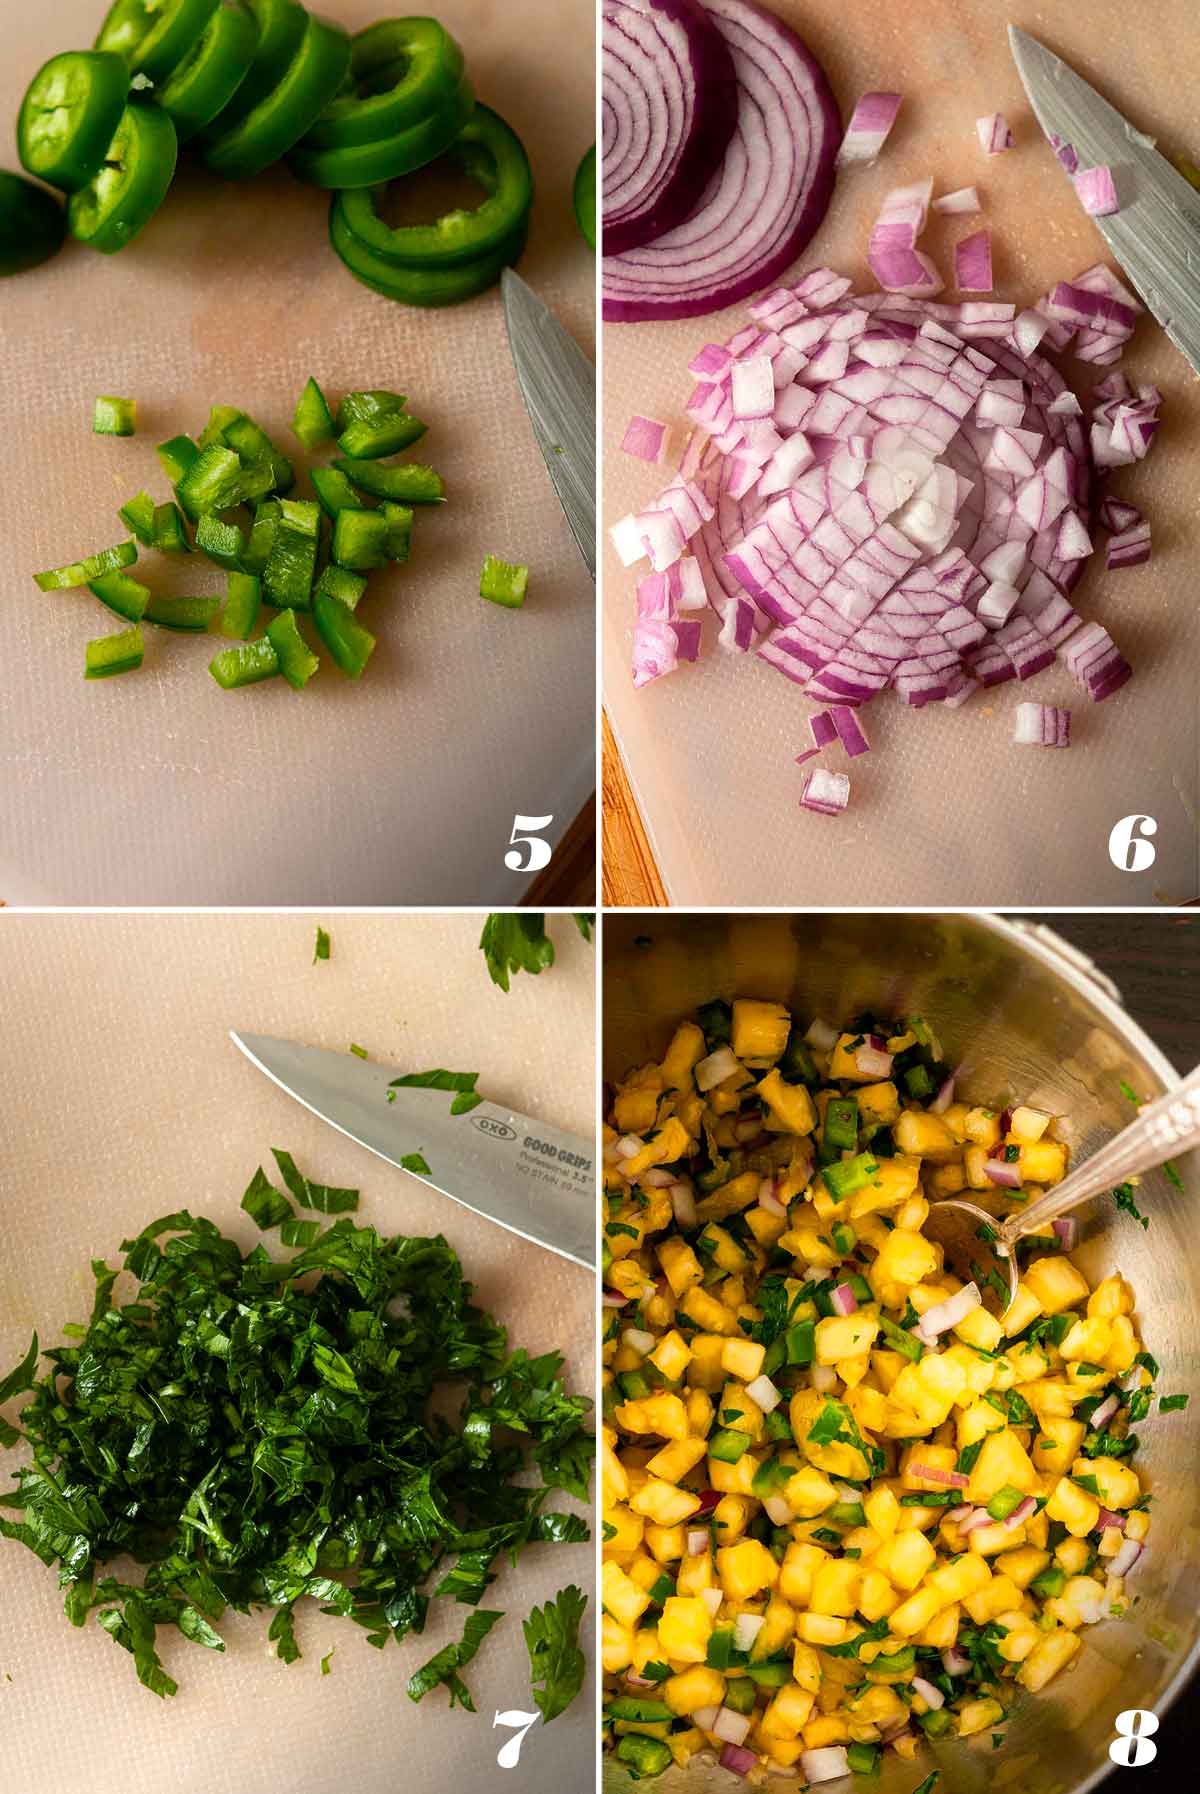 A collage of 4 numbered images showing how to make pineapple jalapeño salsa.